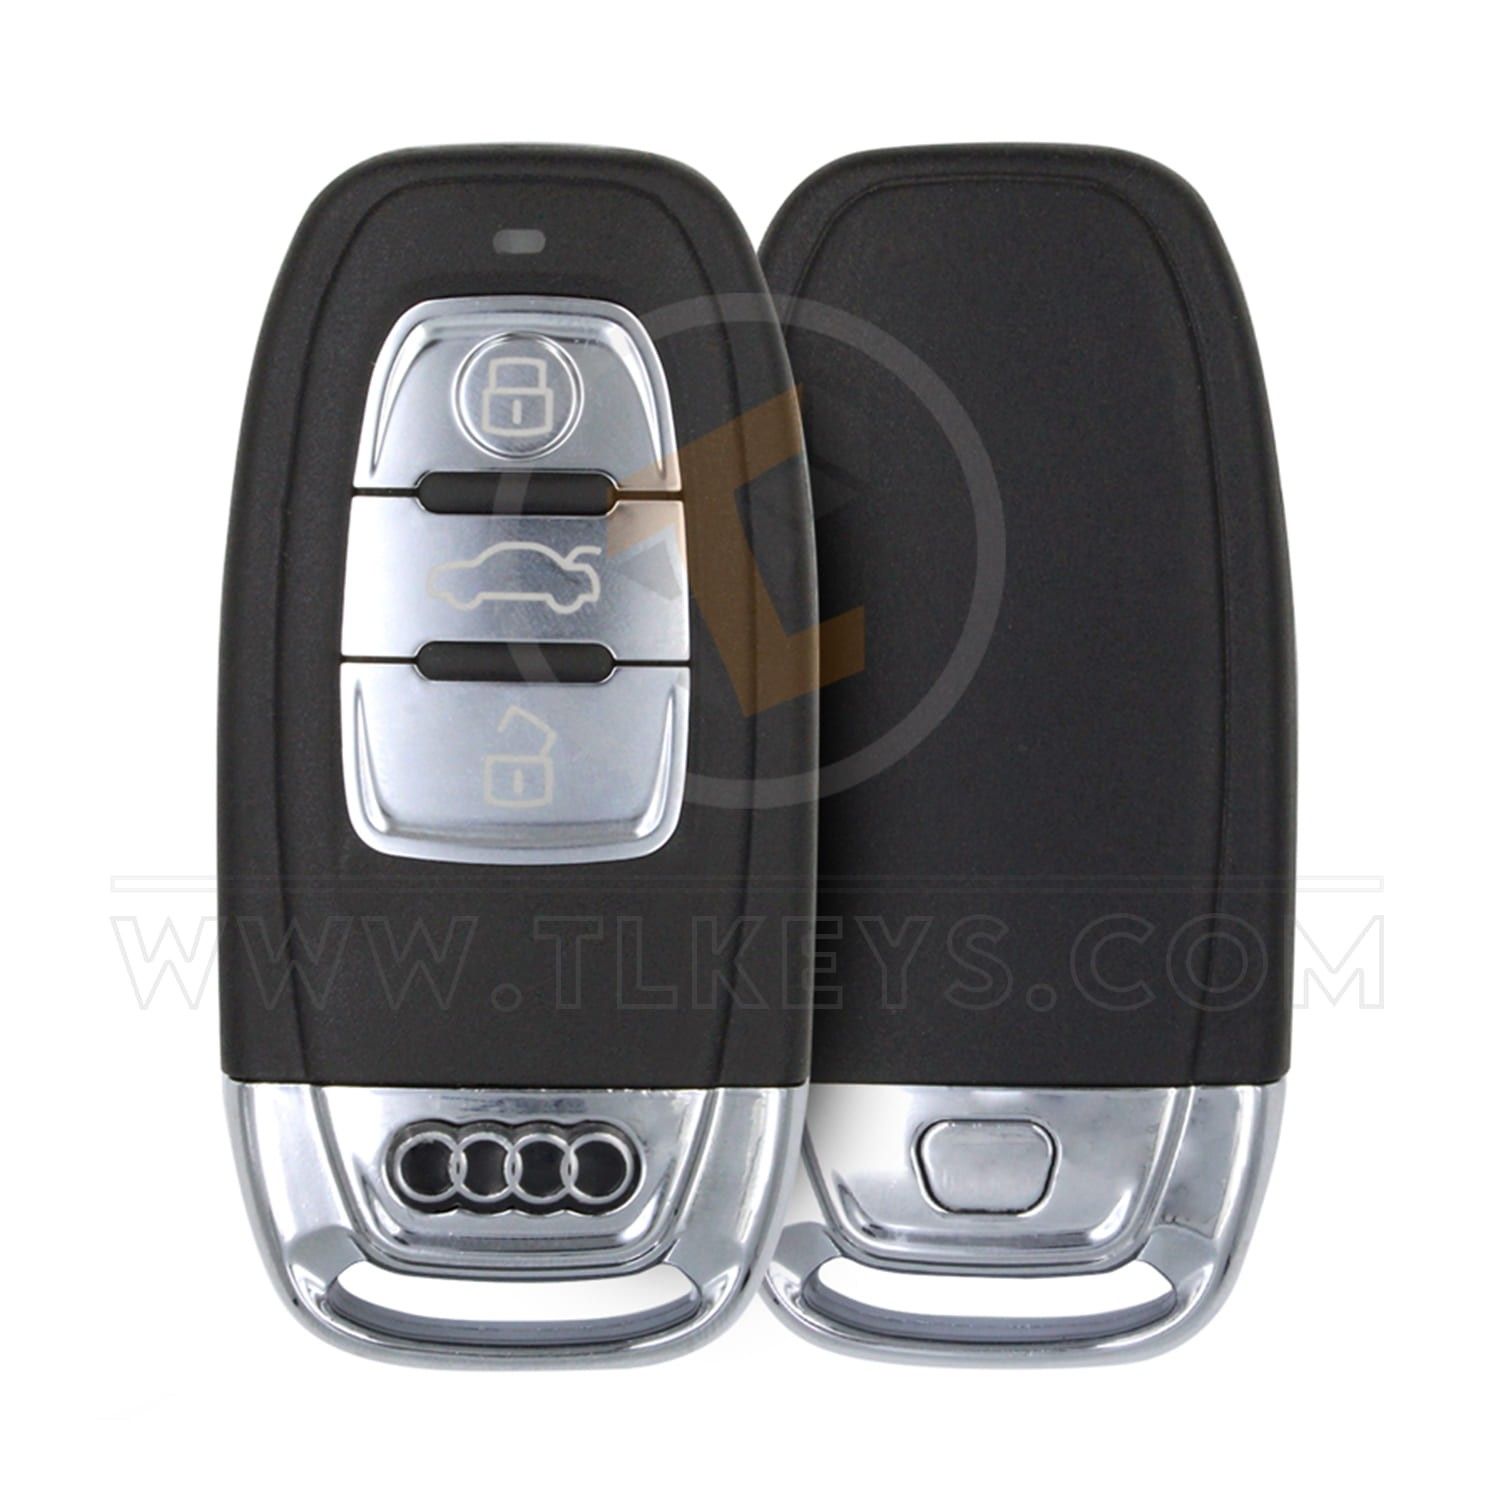 Used Audi Remote Key Q3 Frequency 868MHz